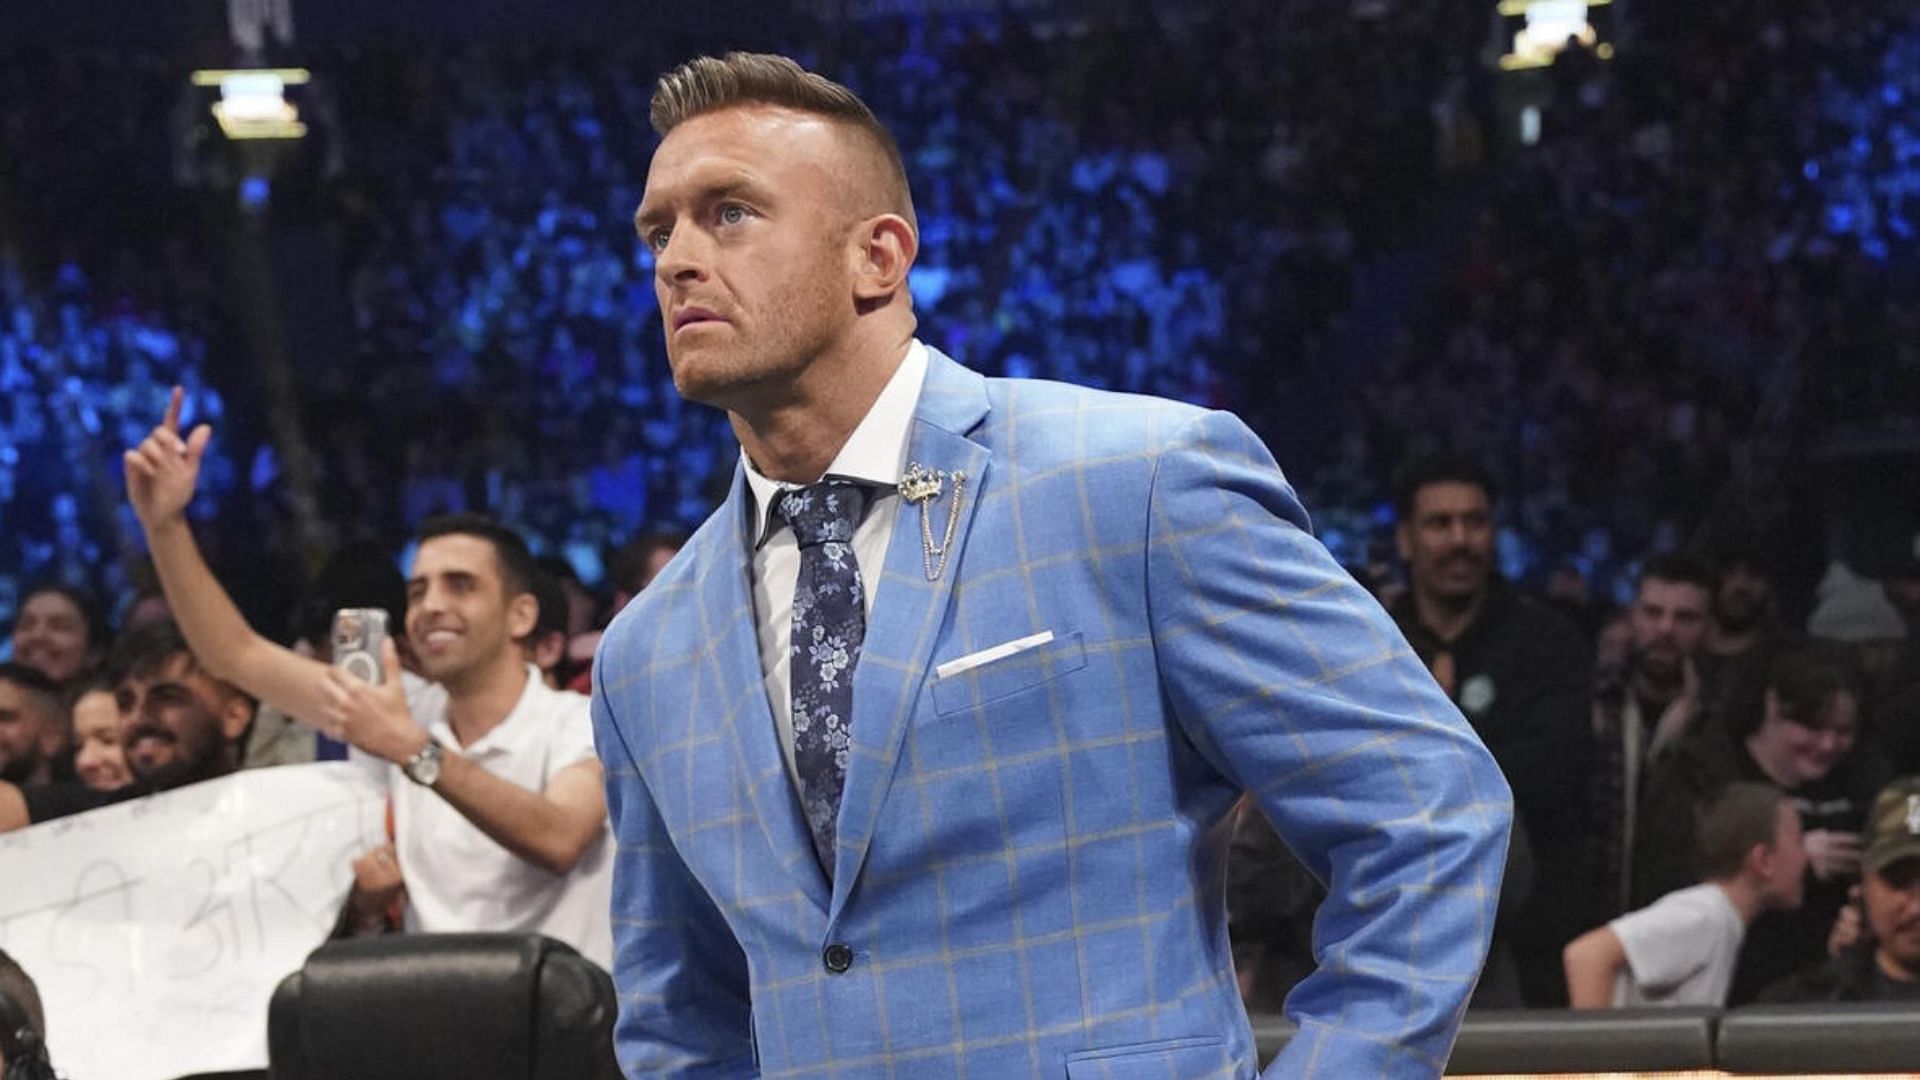 Nick Aldis is the current General Manager of SmackDown!